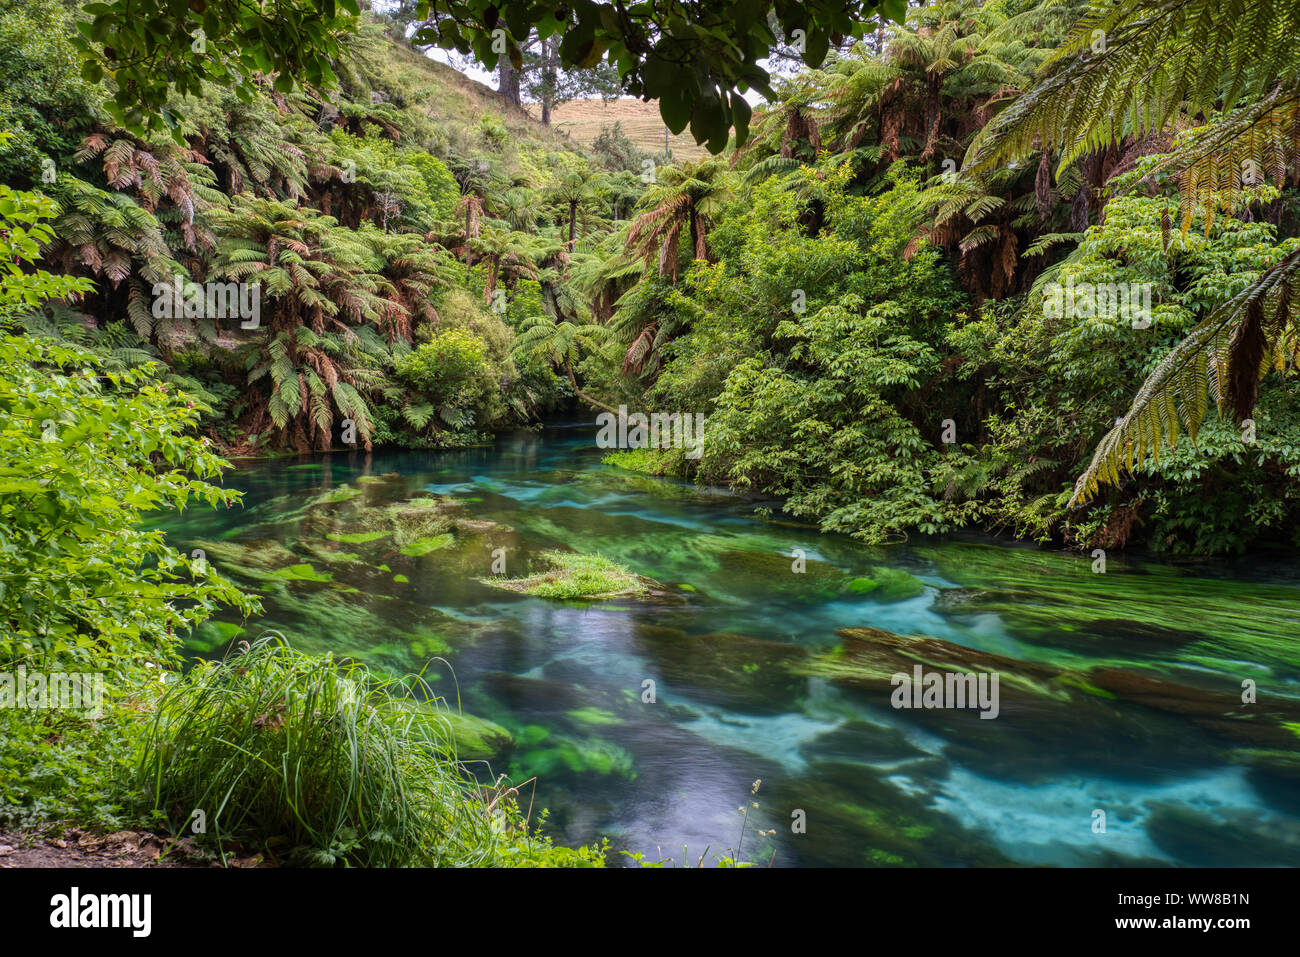 A Crystal Clear River In The Waikato Region Of New Zealand Stock Photo Alamy